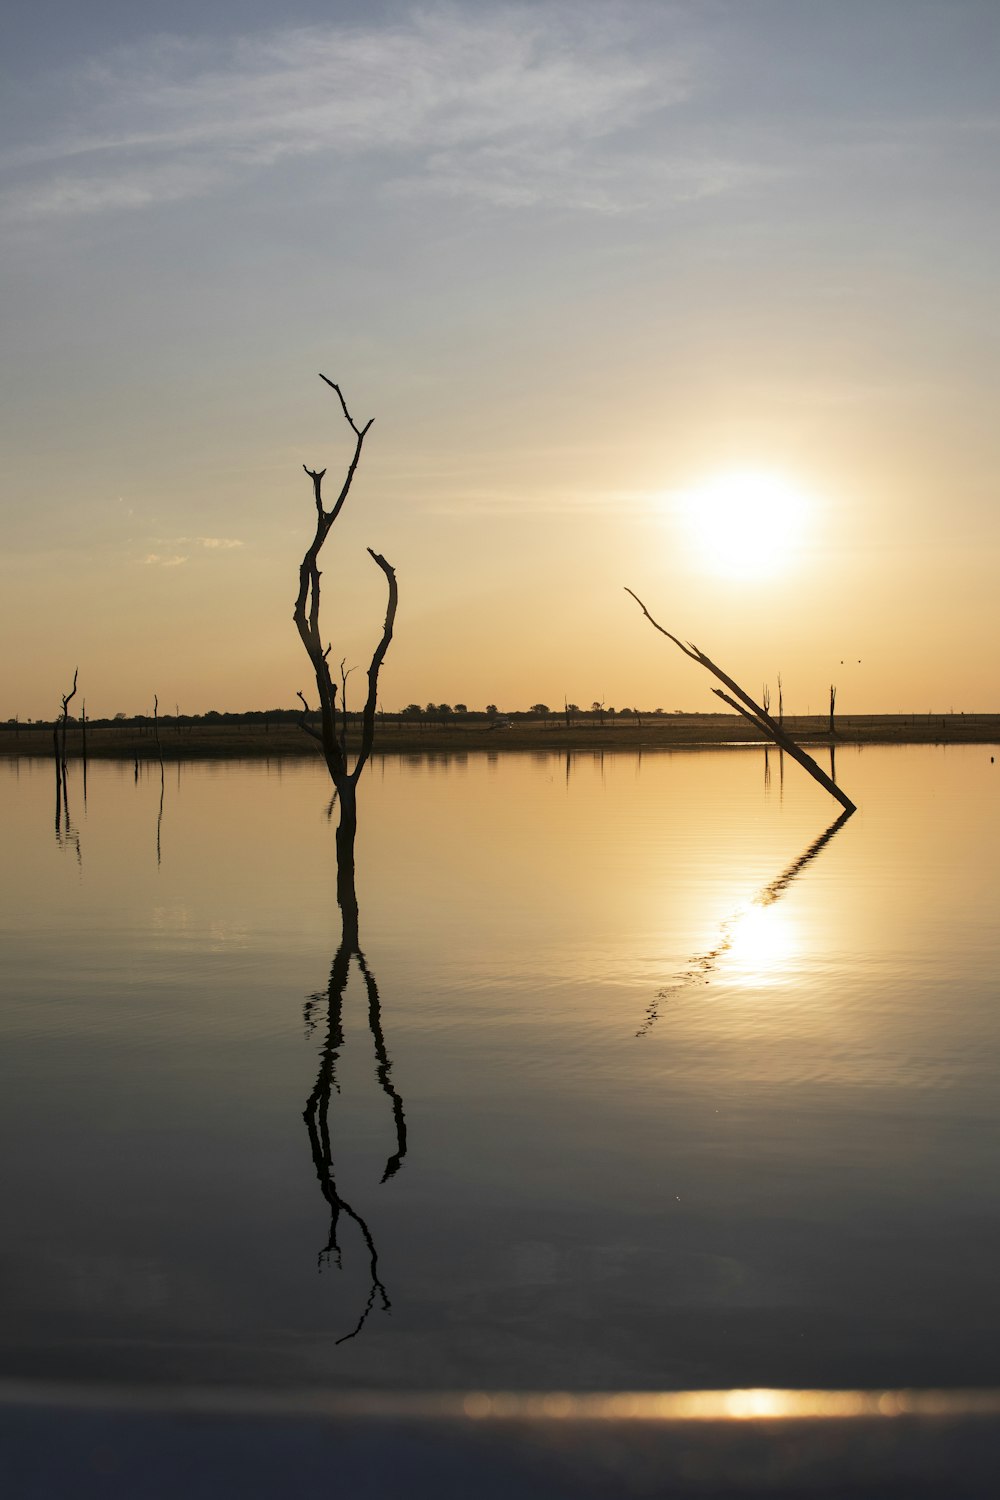 the sun is setting over the water with a dead tree in the foreground